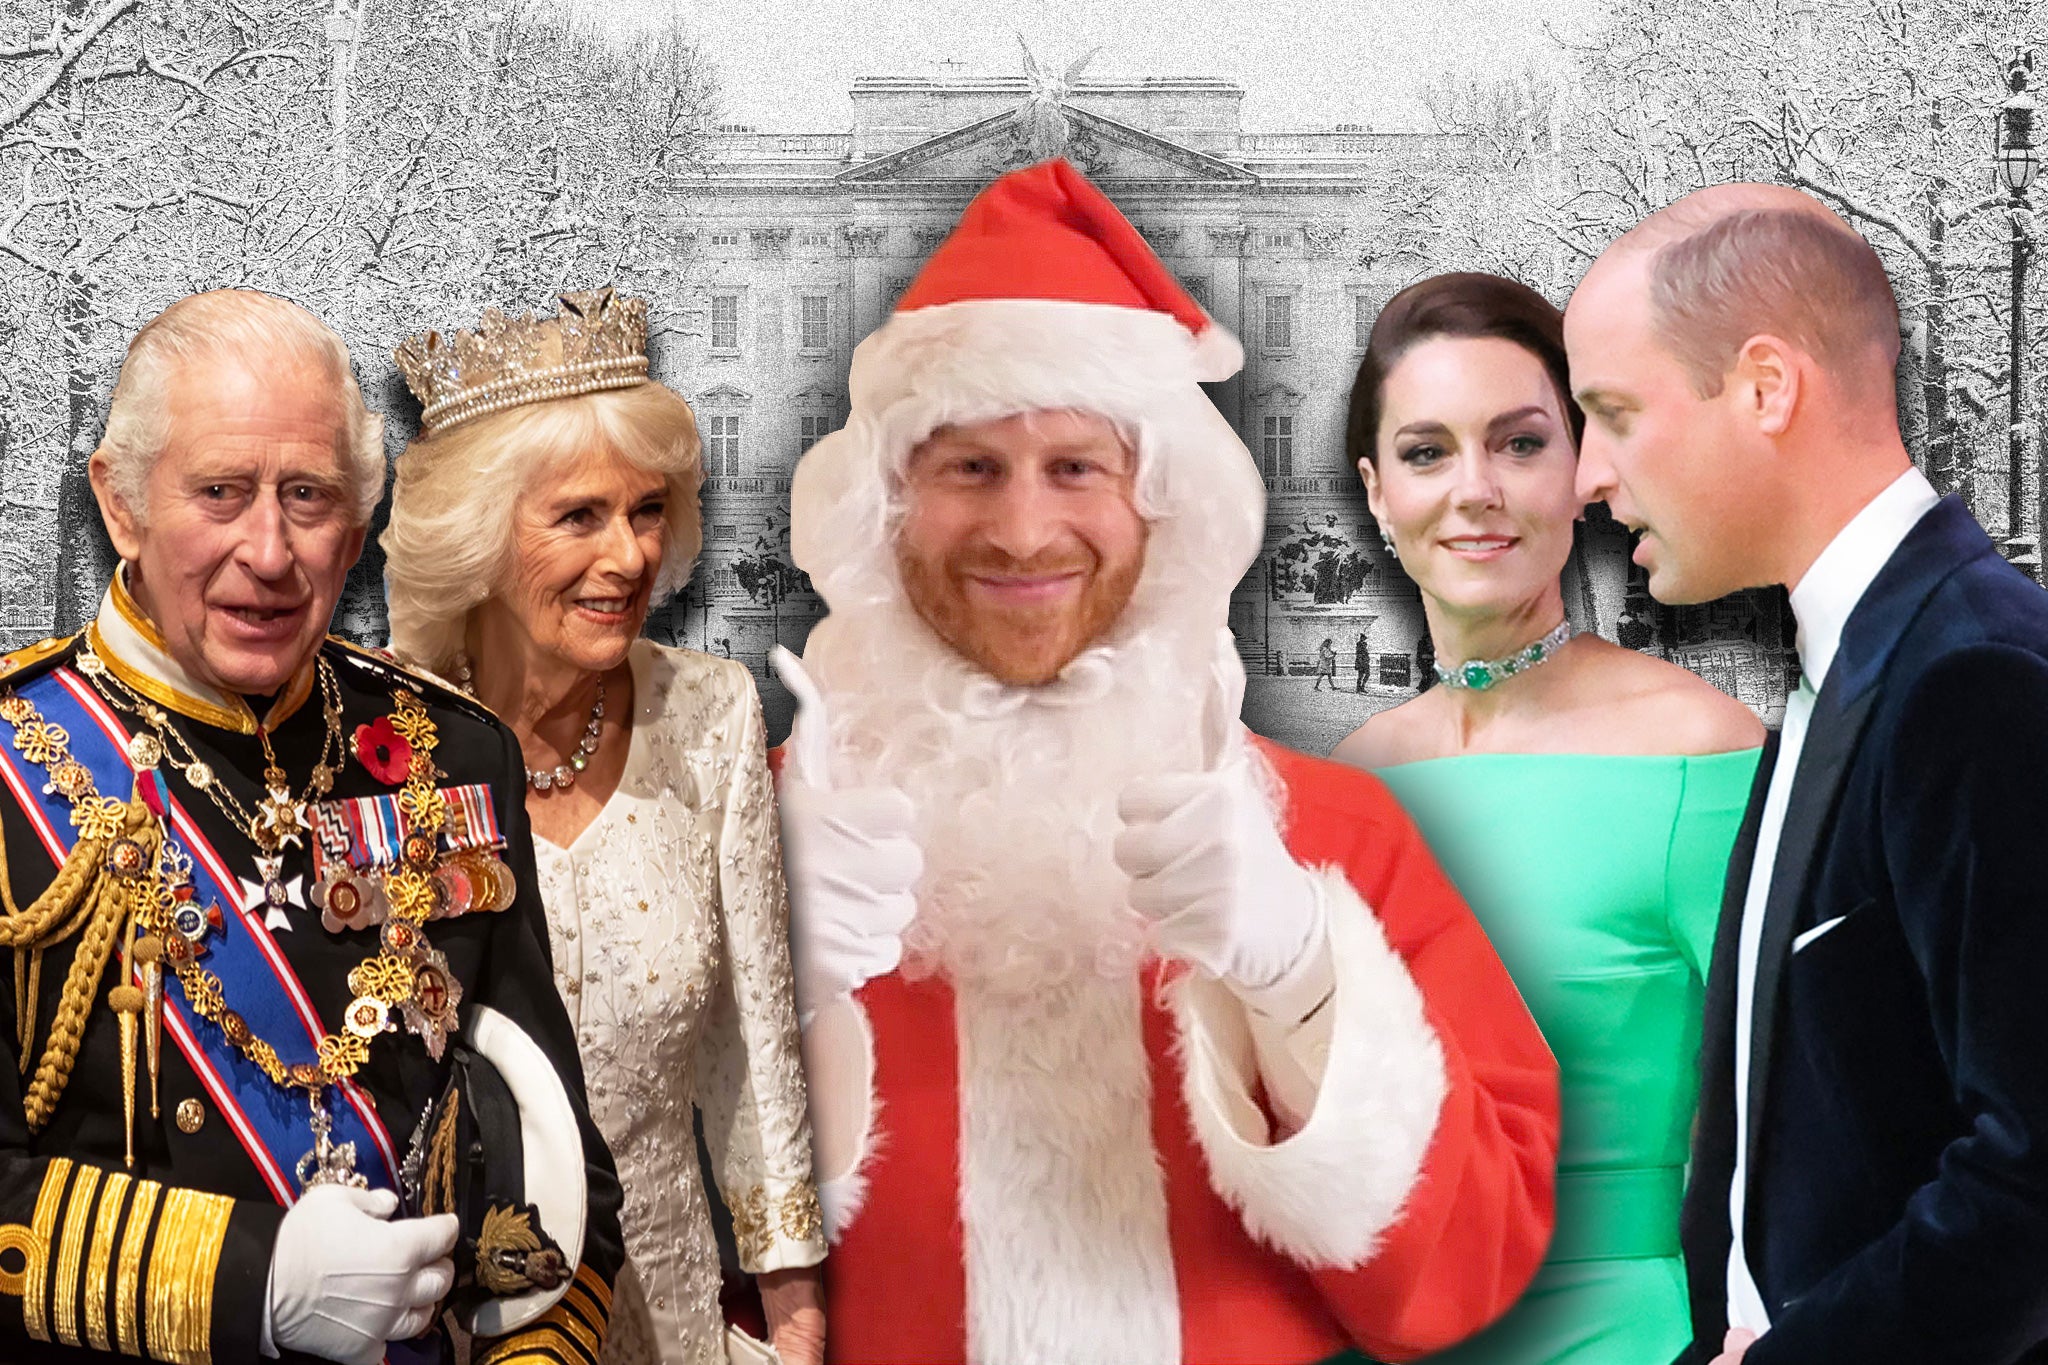 prince harry, king charles iii, christmas, why king charles may prefer a ‘happy’ christmas to a ‘harry’ christmas this year